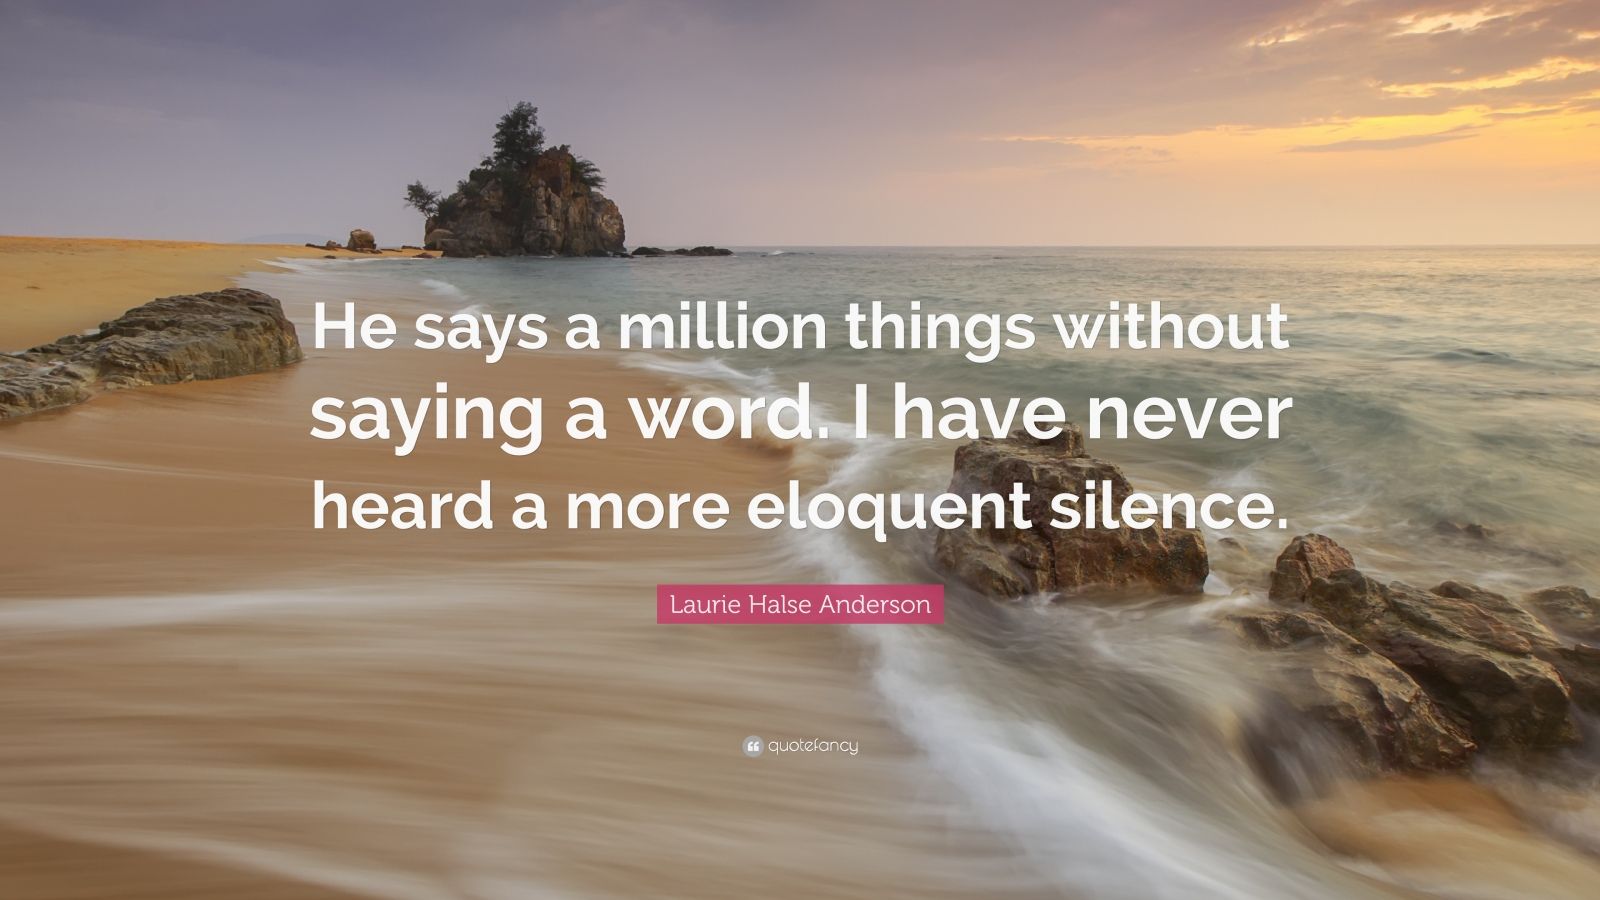 Laurie Halse Anderson Quote: “He says a million things without saying a ...